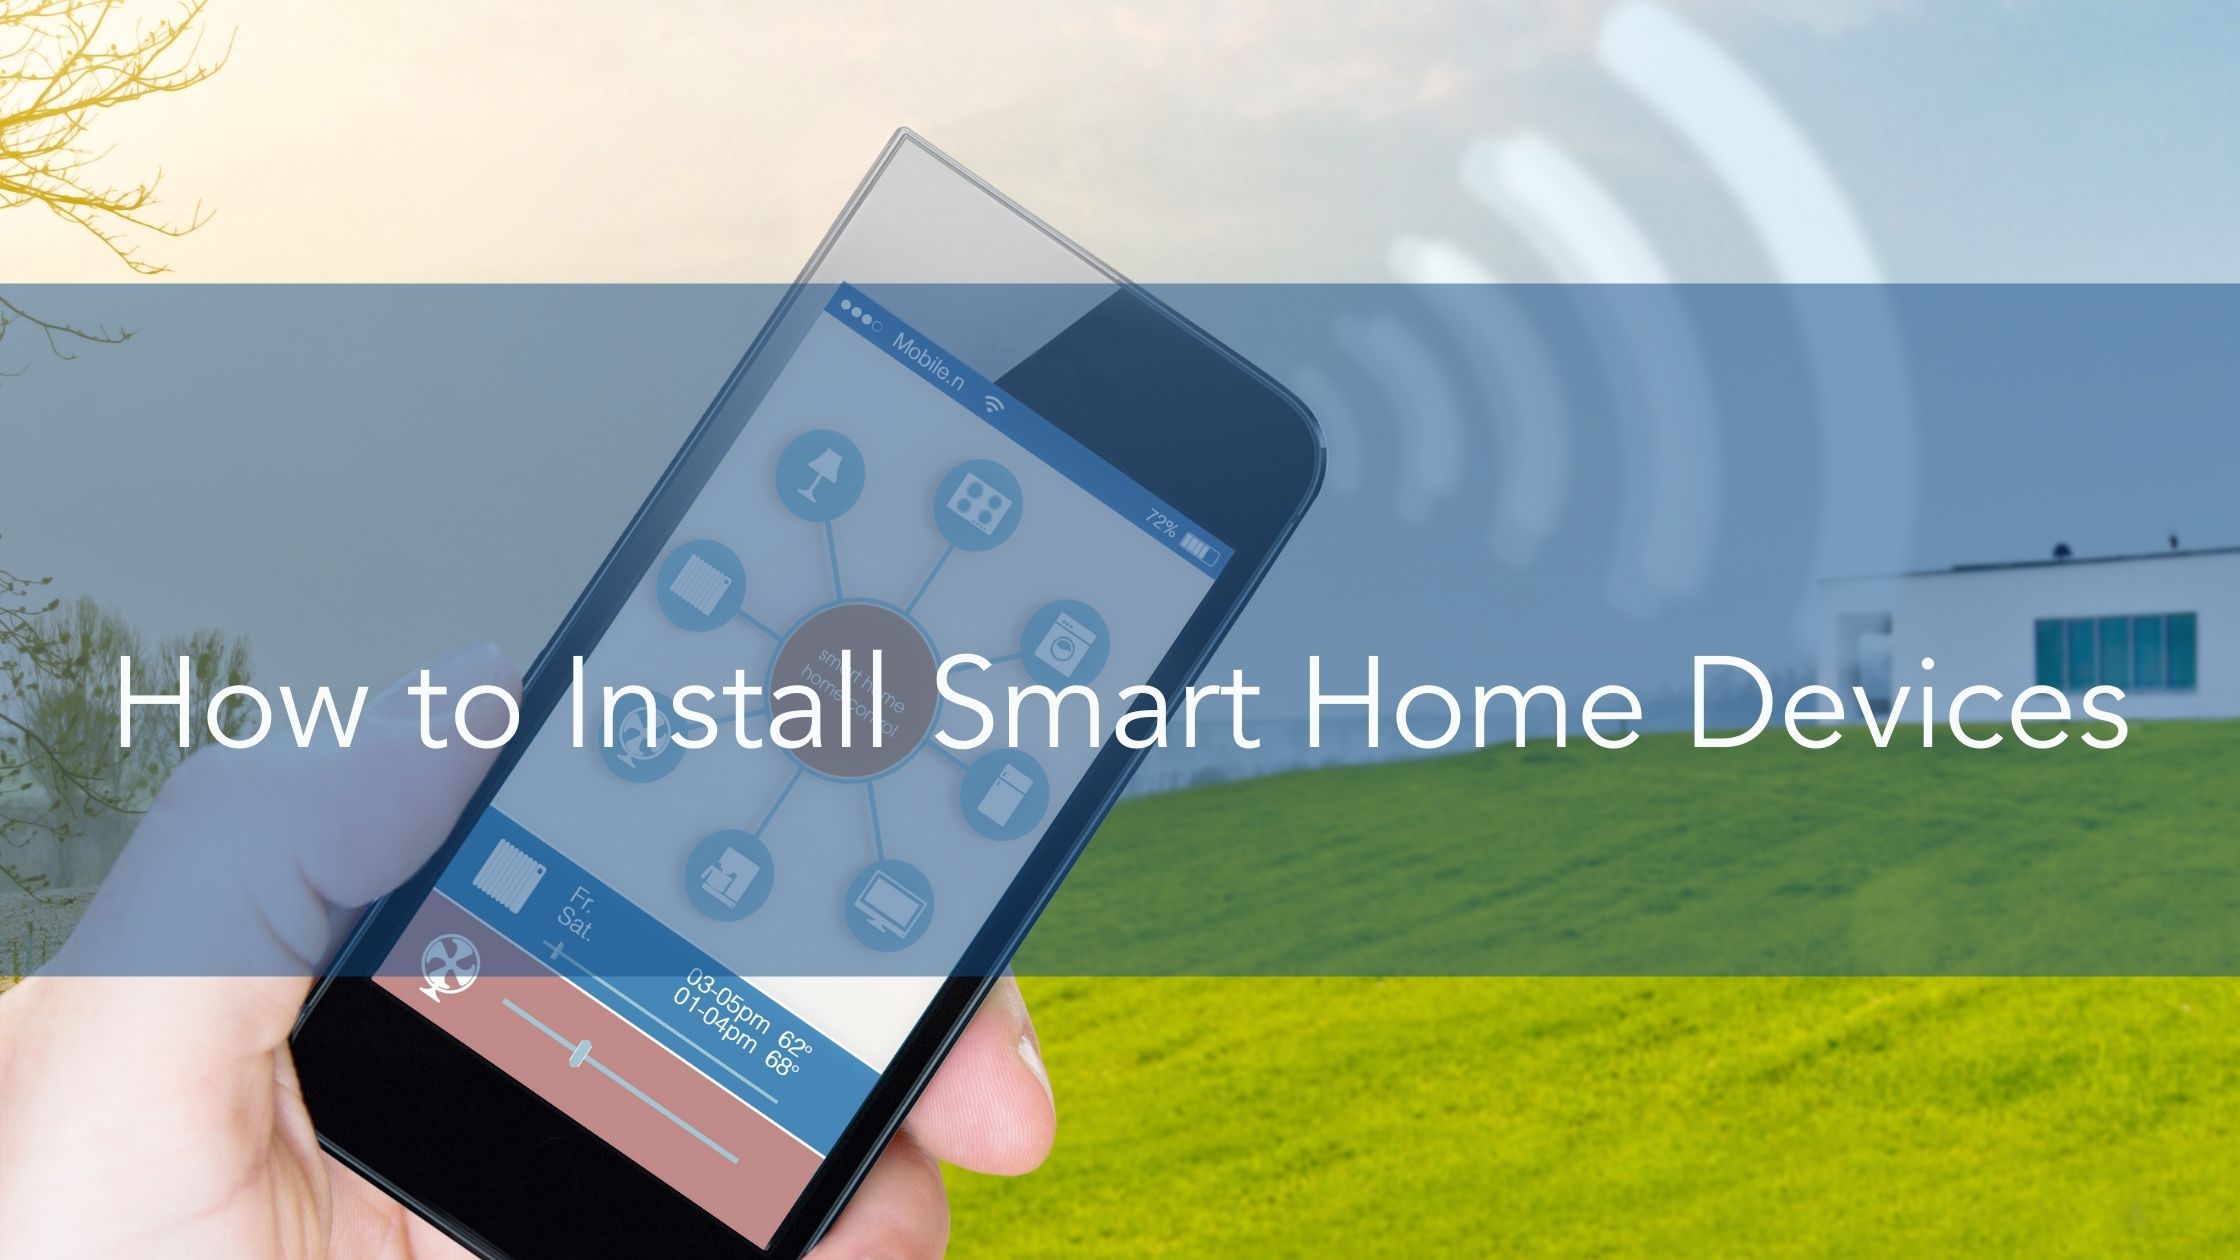 How to Install Smart Home Devices